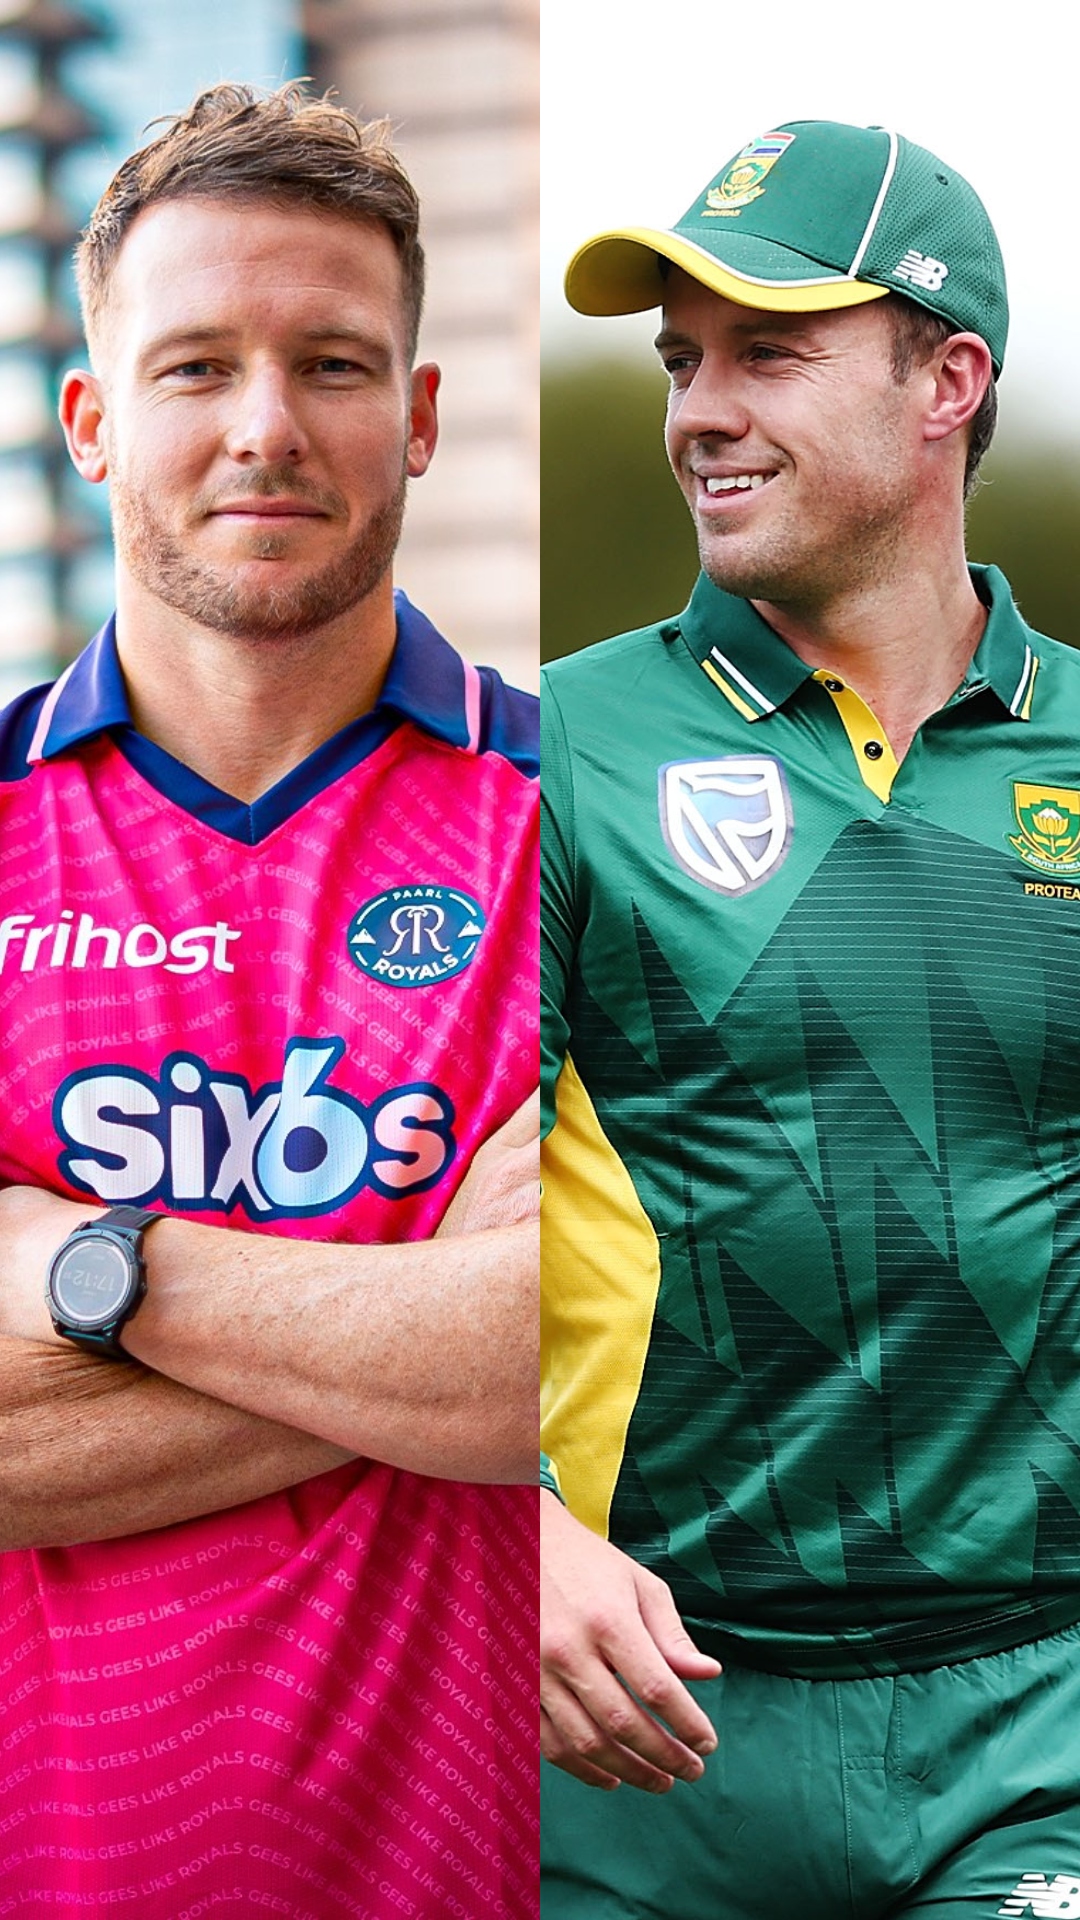 David Miller creates history for SA, achieves what AB de Villiers, Faf du Plessis have not